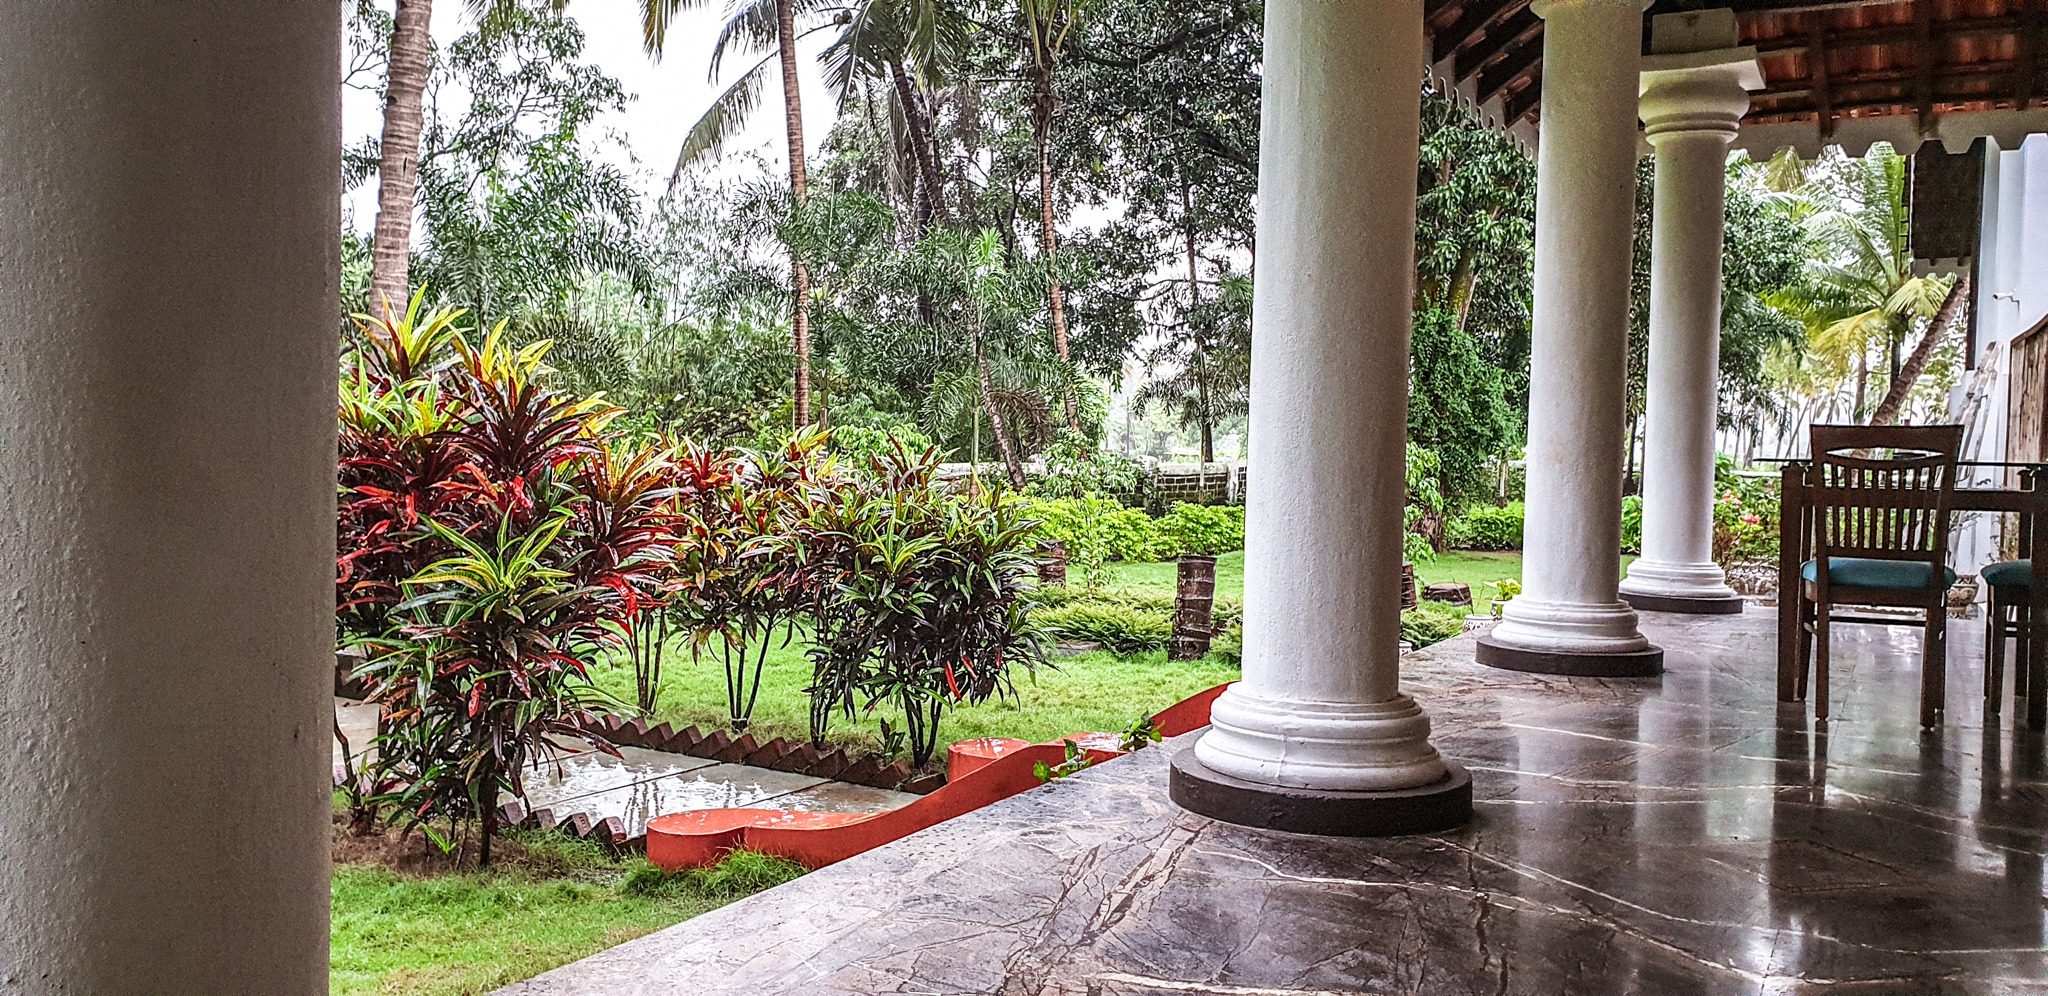 A Sustainable Travel Guide to Goa, India